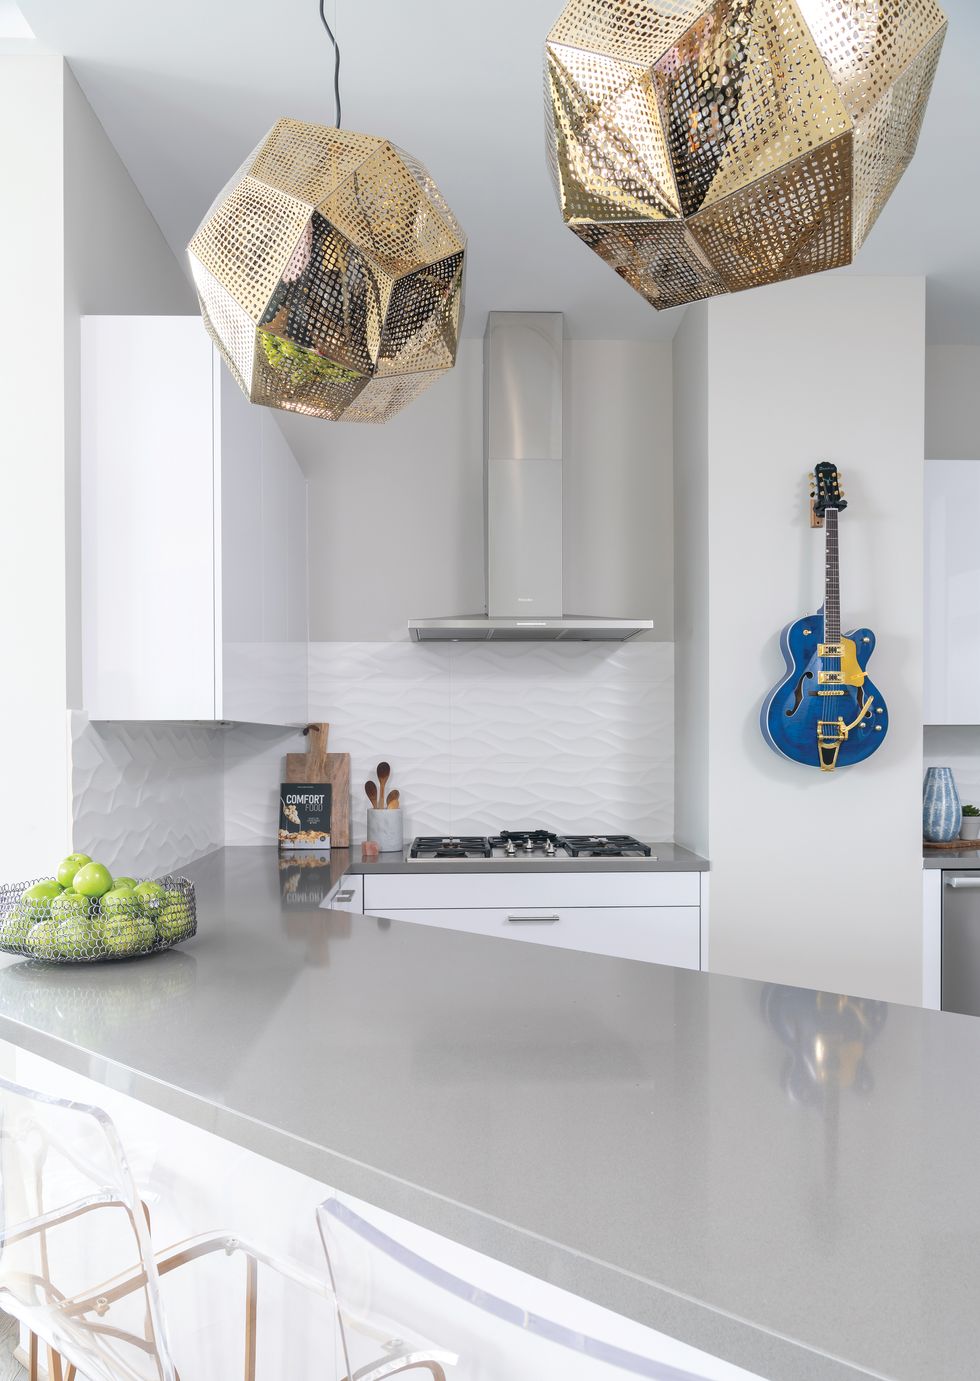 In the kitchen, a high-gloss blue electric guitar and pendant lighting from Avenue serves as art